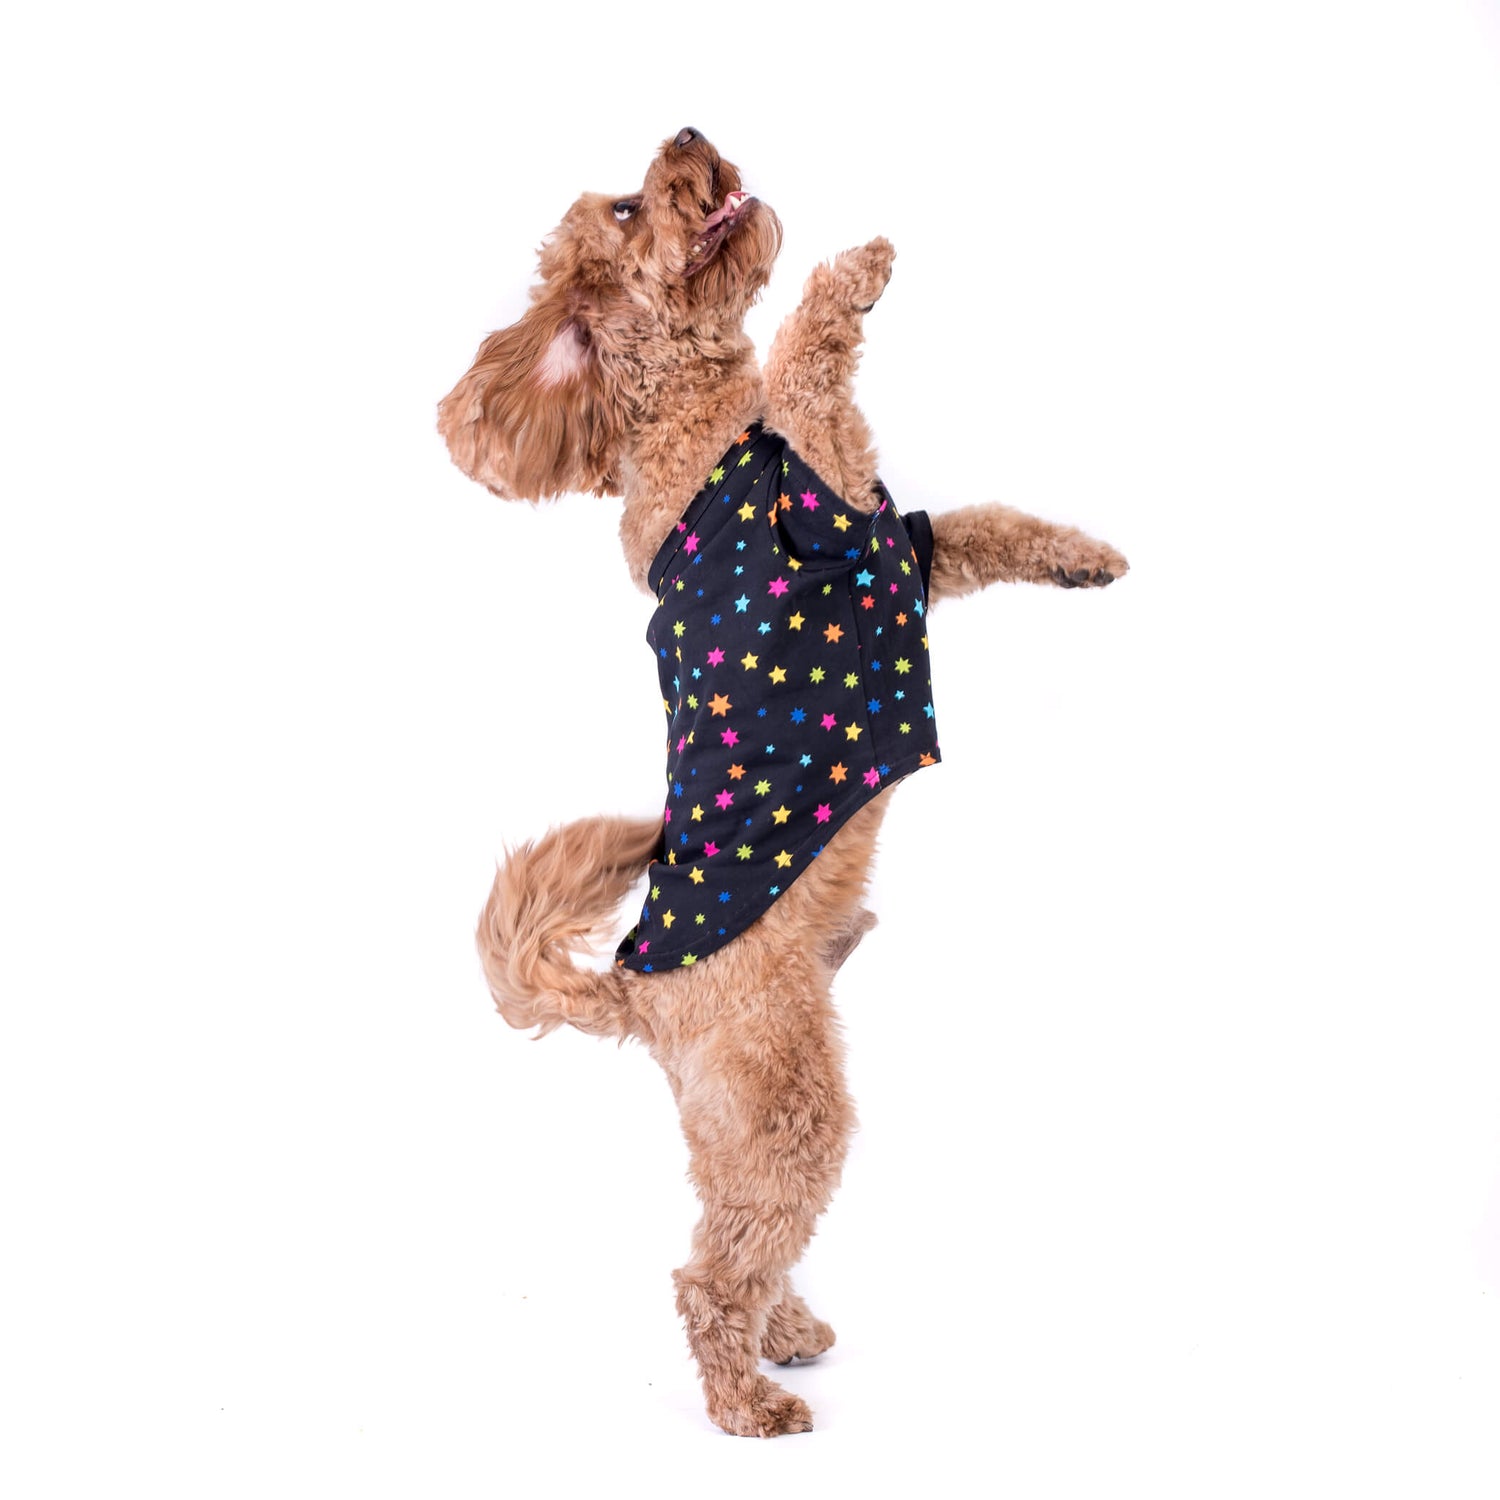 Cavoodle in star gazer dog shirt - Adorable Cavoodle standing on back legs in a black shirt with bright multi-colored stars - Elevate your Cavoodle's style with the star gazer shirt - Shop now for trendy dog shirts and clothing with eye-catching designs